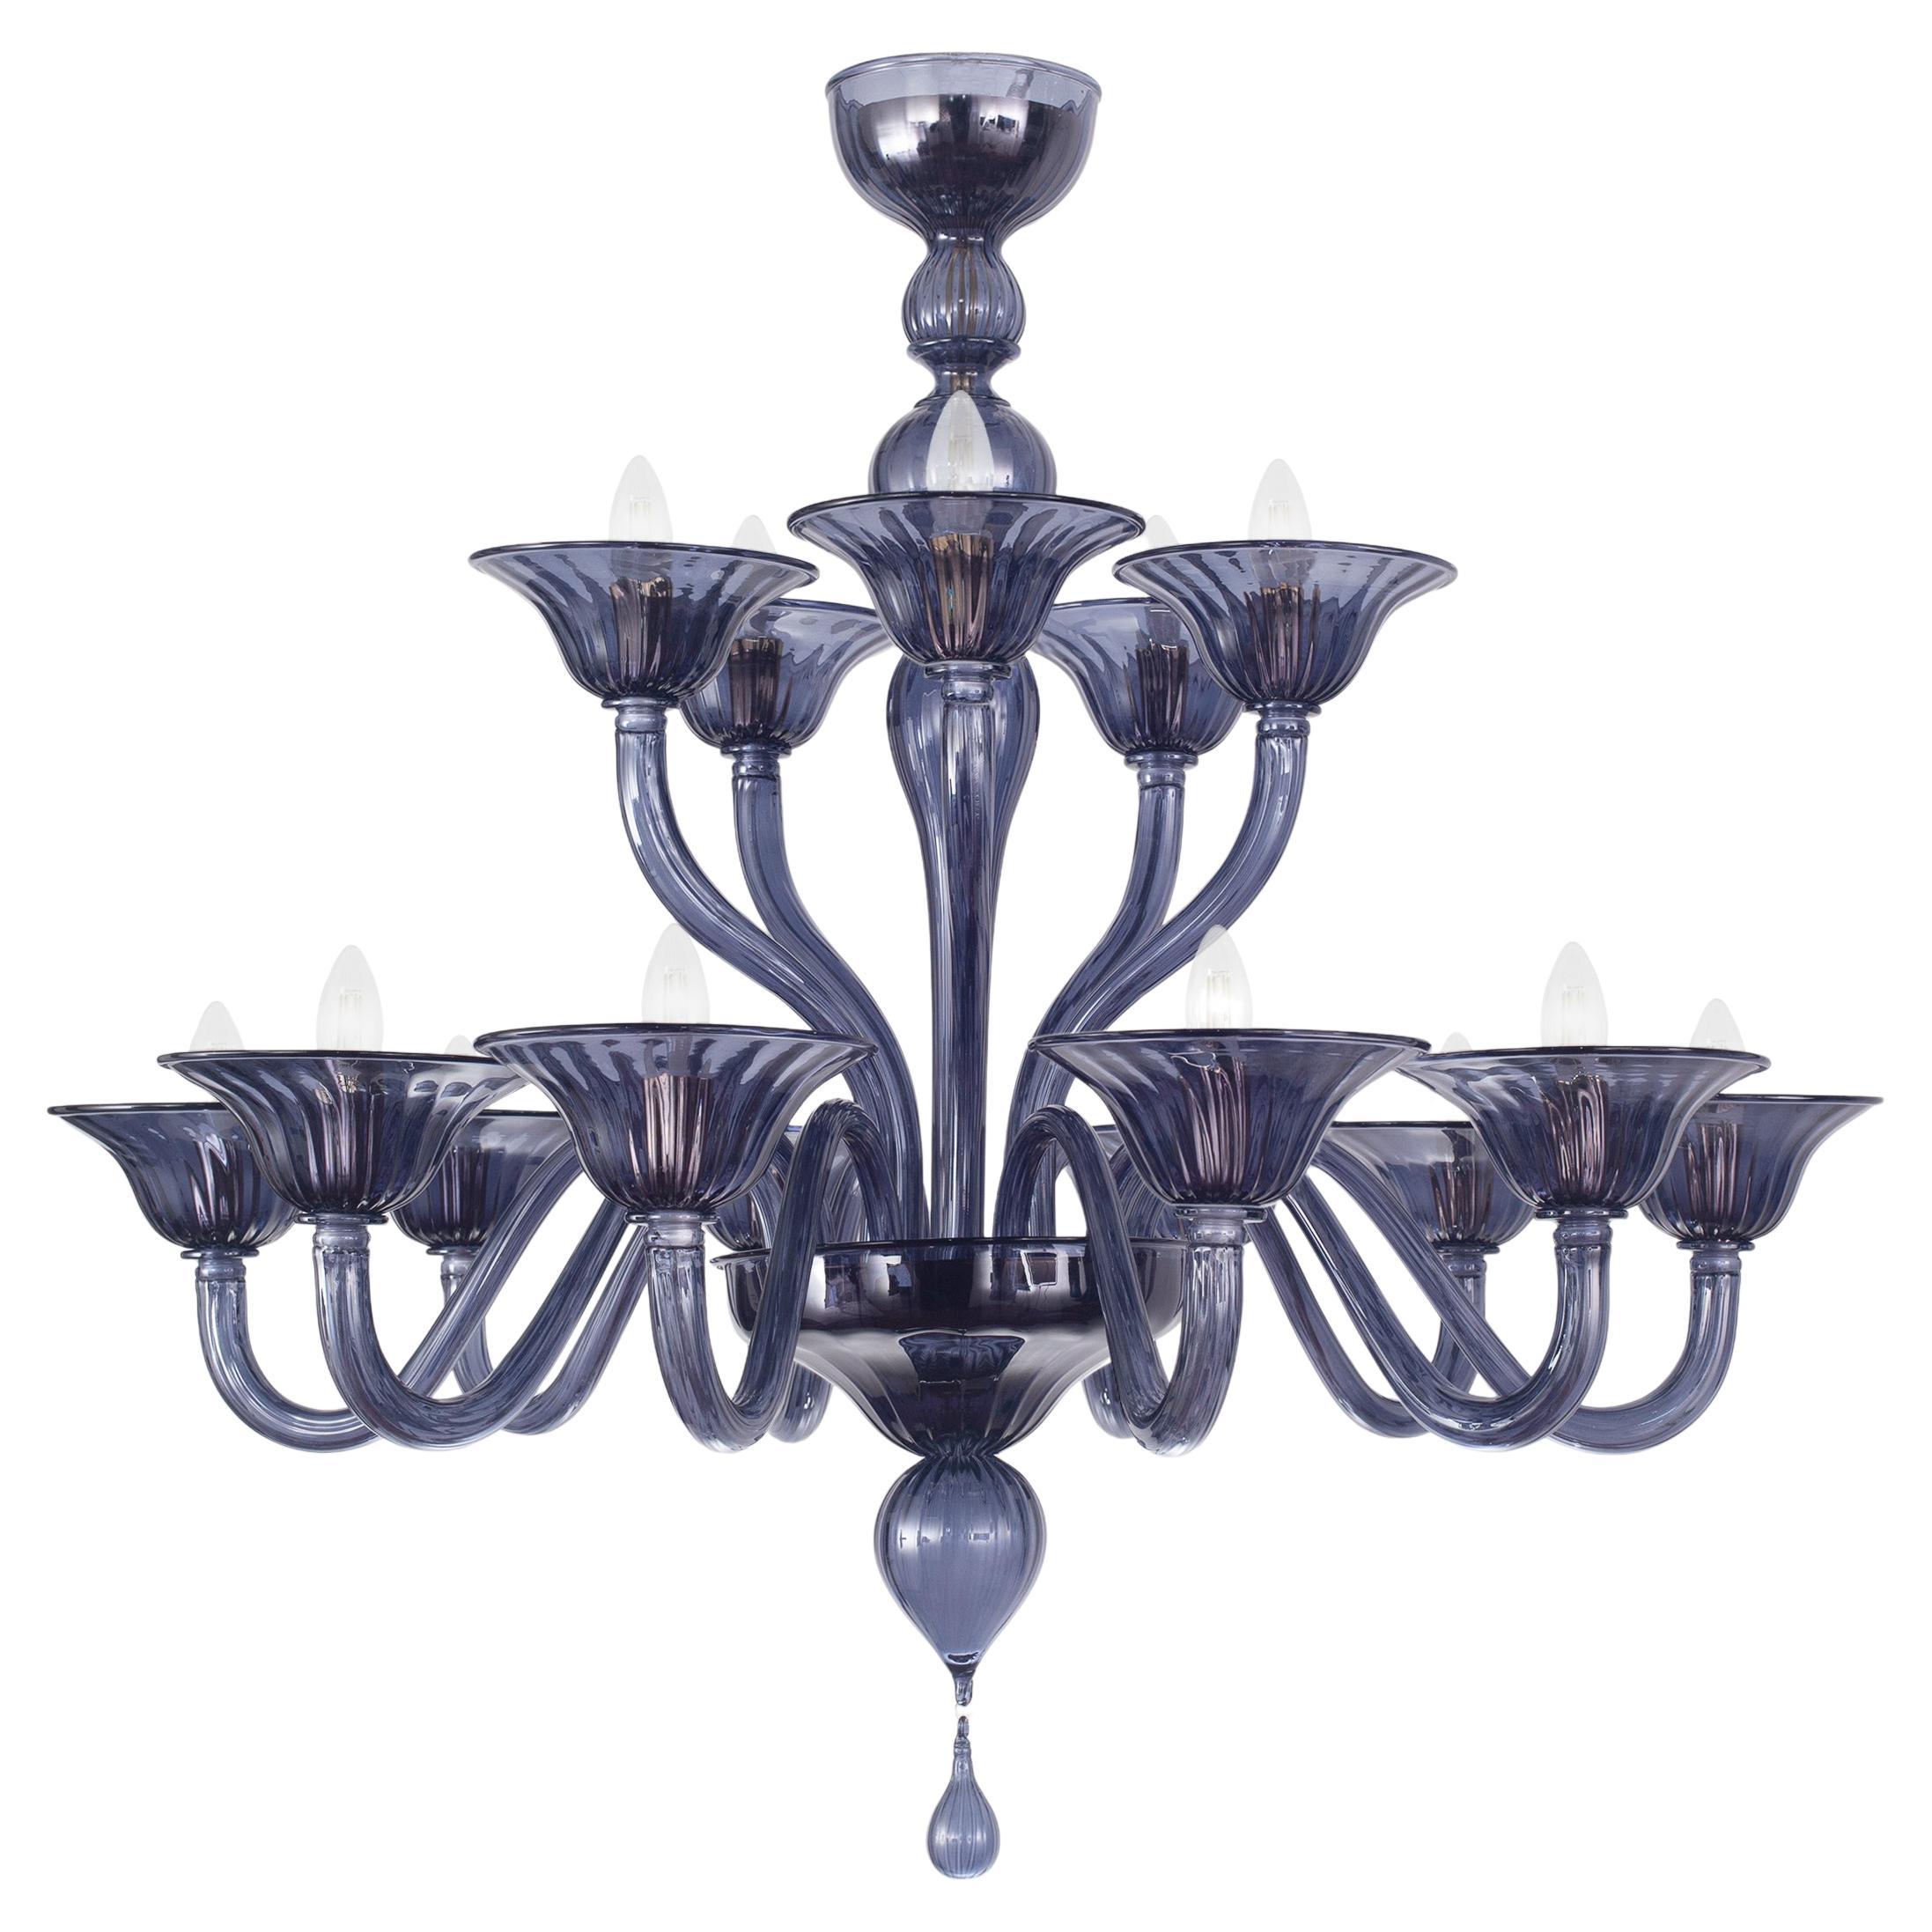 15 Arms Chandelier Slate Blue Artistic Murano Glass Simplicissimus by Multiforme